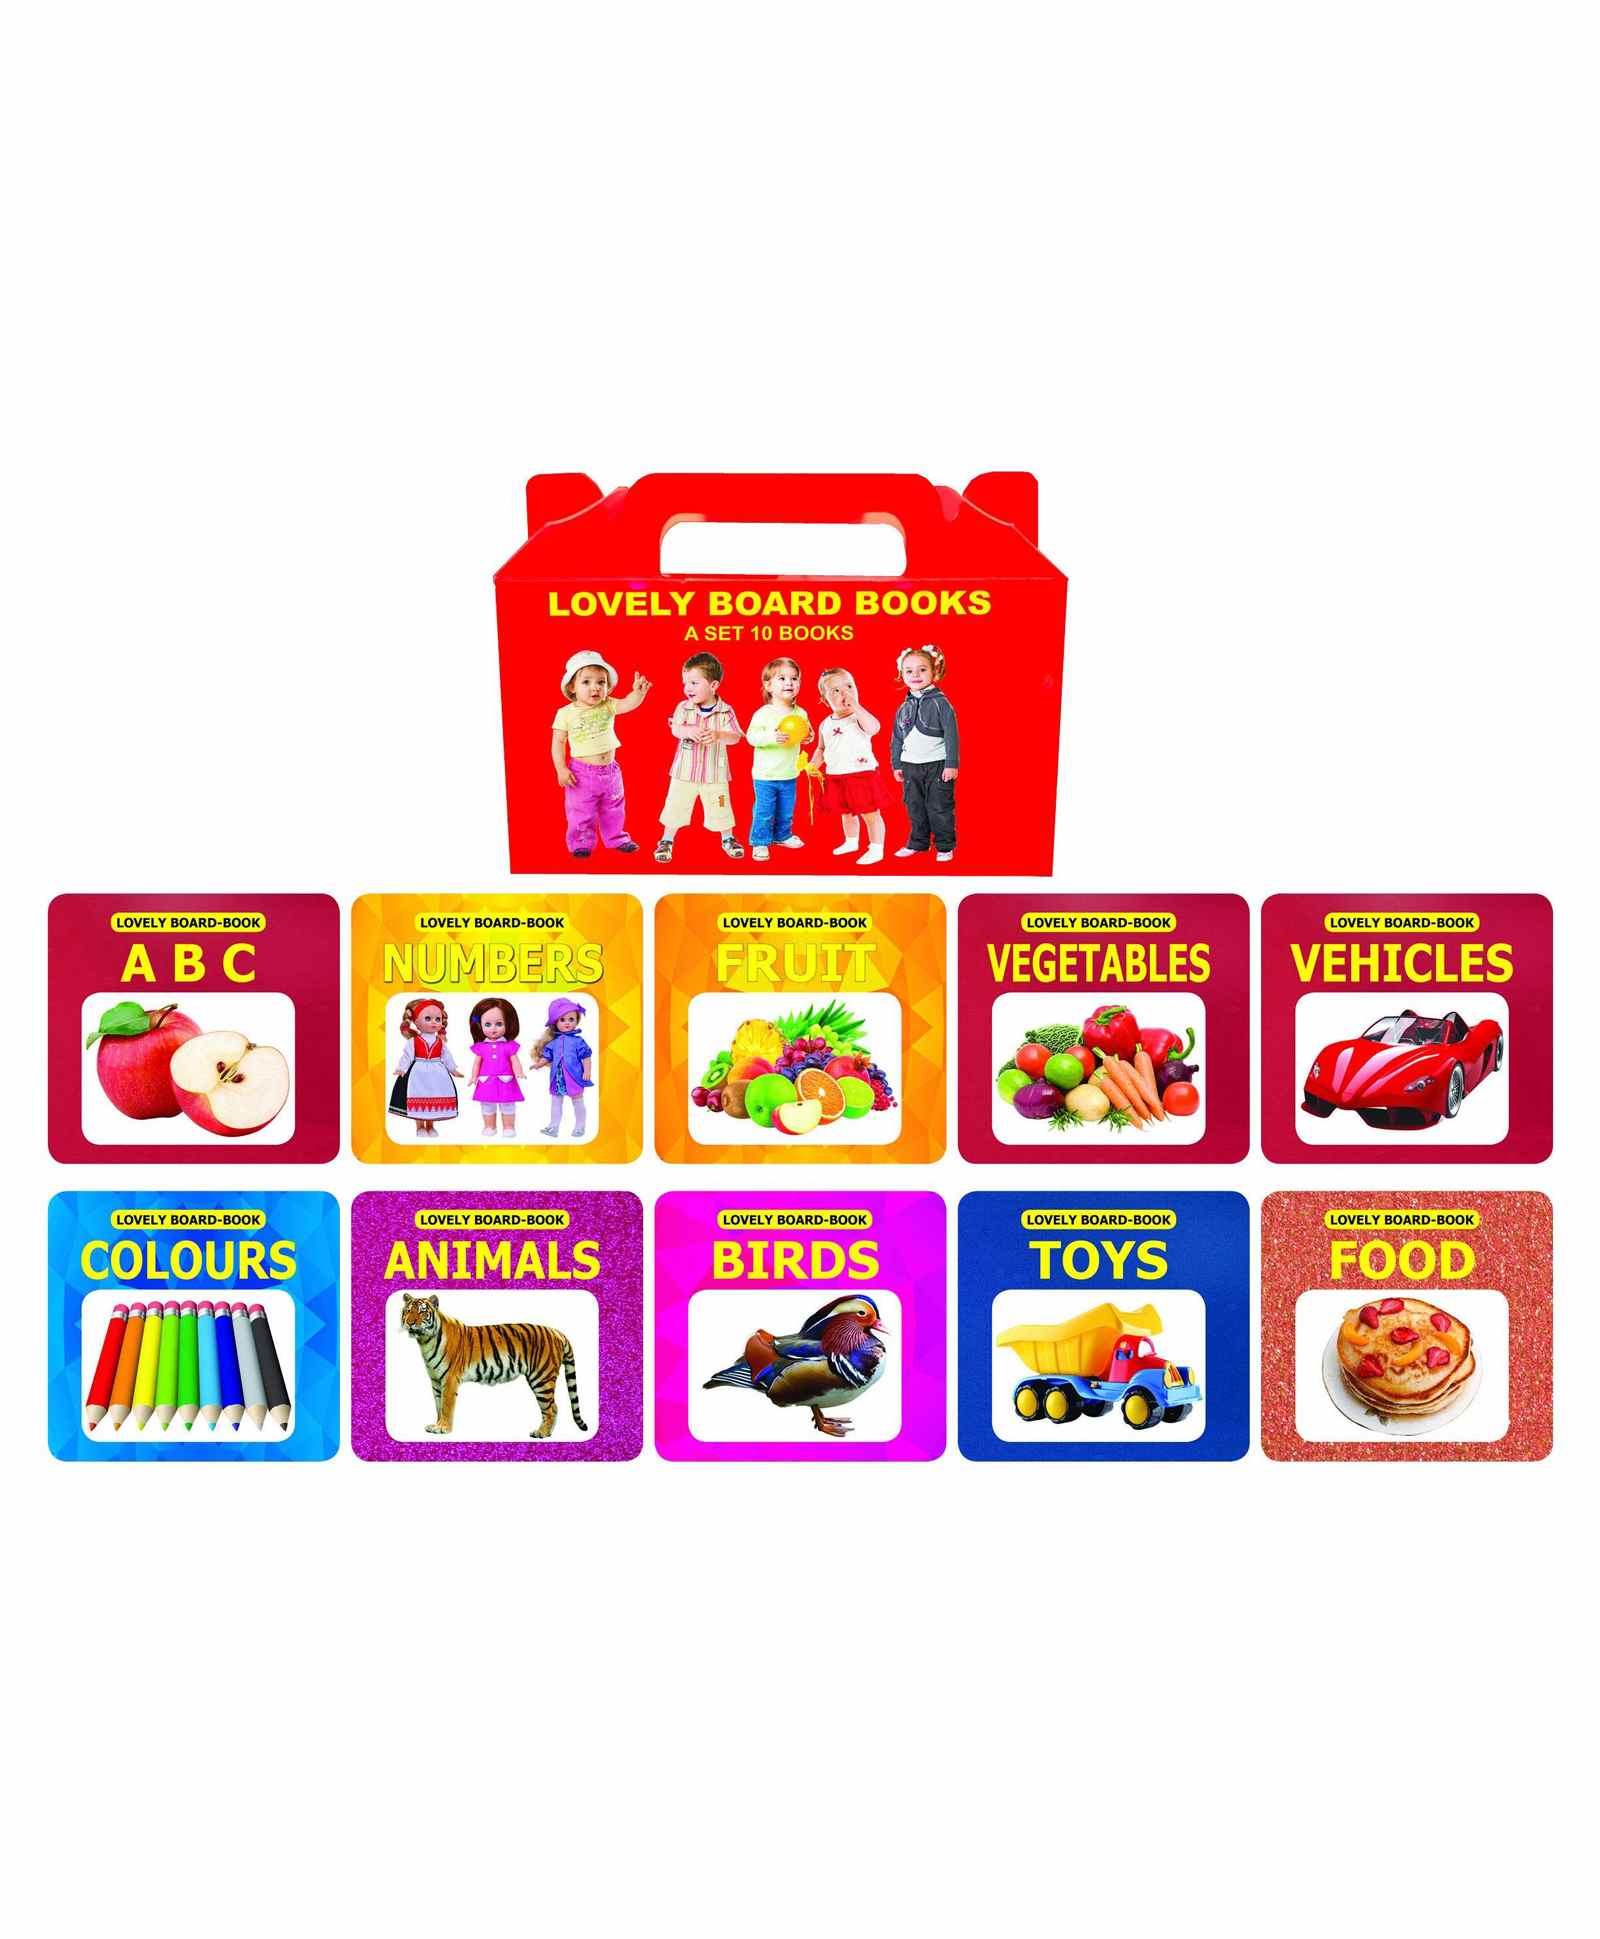 Dreamland Lovely Board Books Gift Box Set of 10 Books - ABC, Number, Fruit,  Vegetables, Vehicles, Colours, Animals, Birds, Toys, Food , Easy ...  Learning Picture Board Books Pack: Gift Pack Online